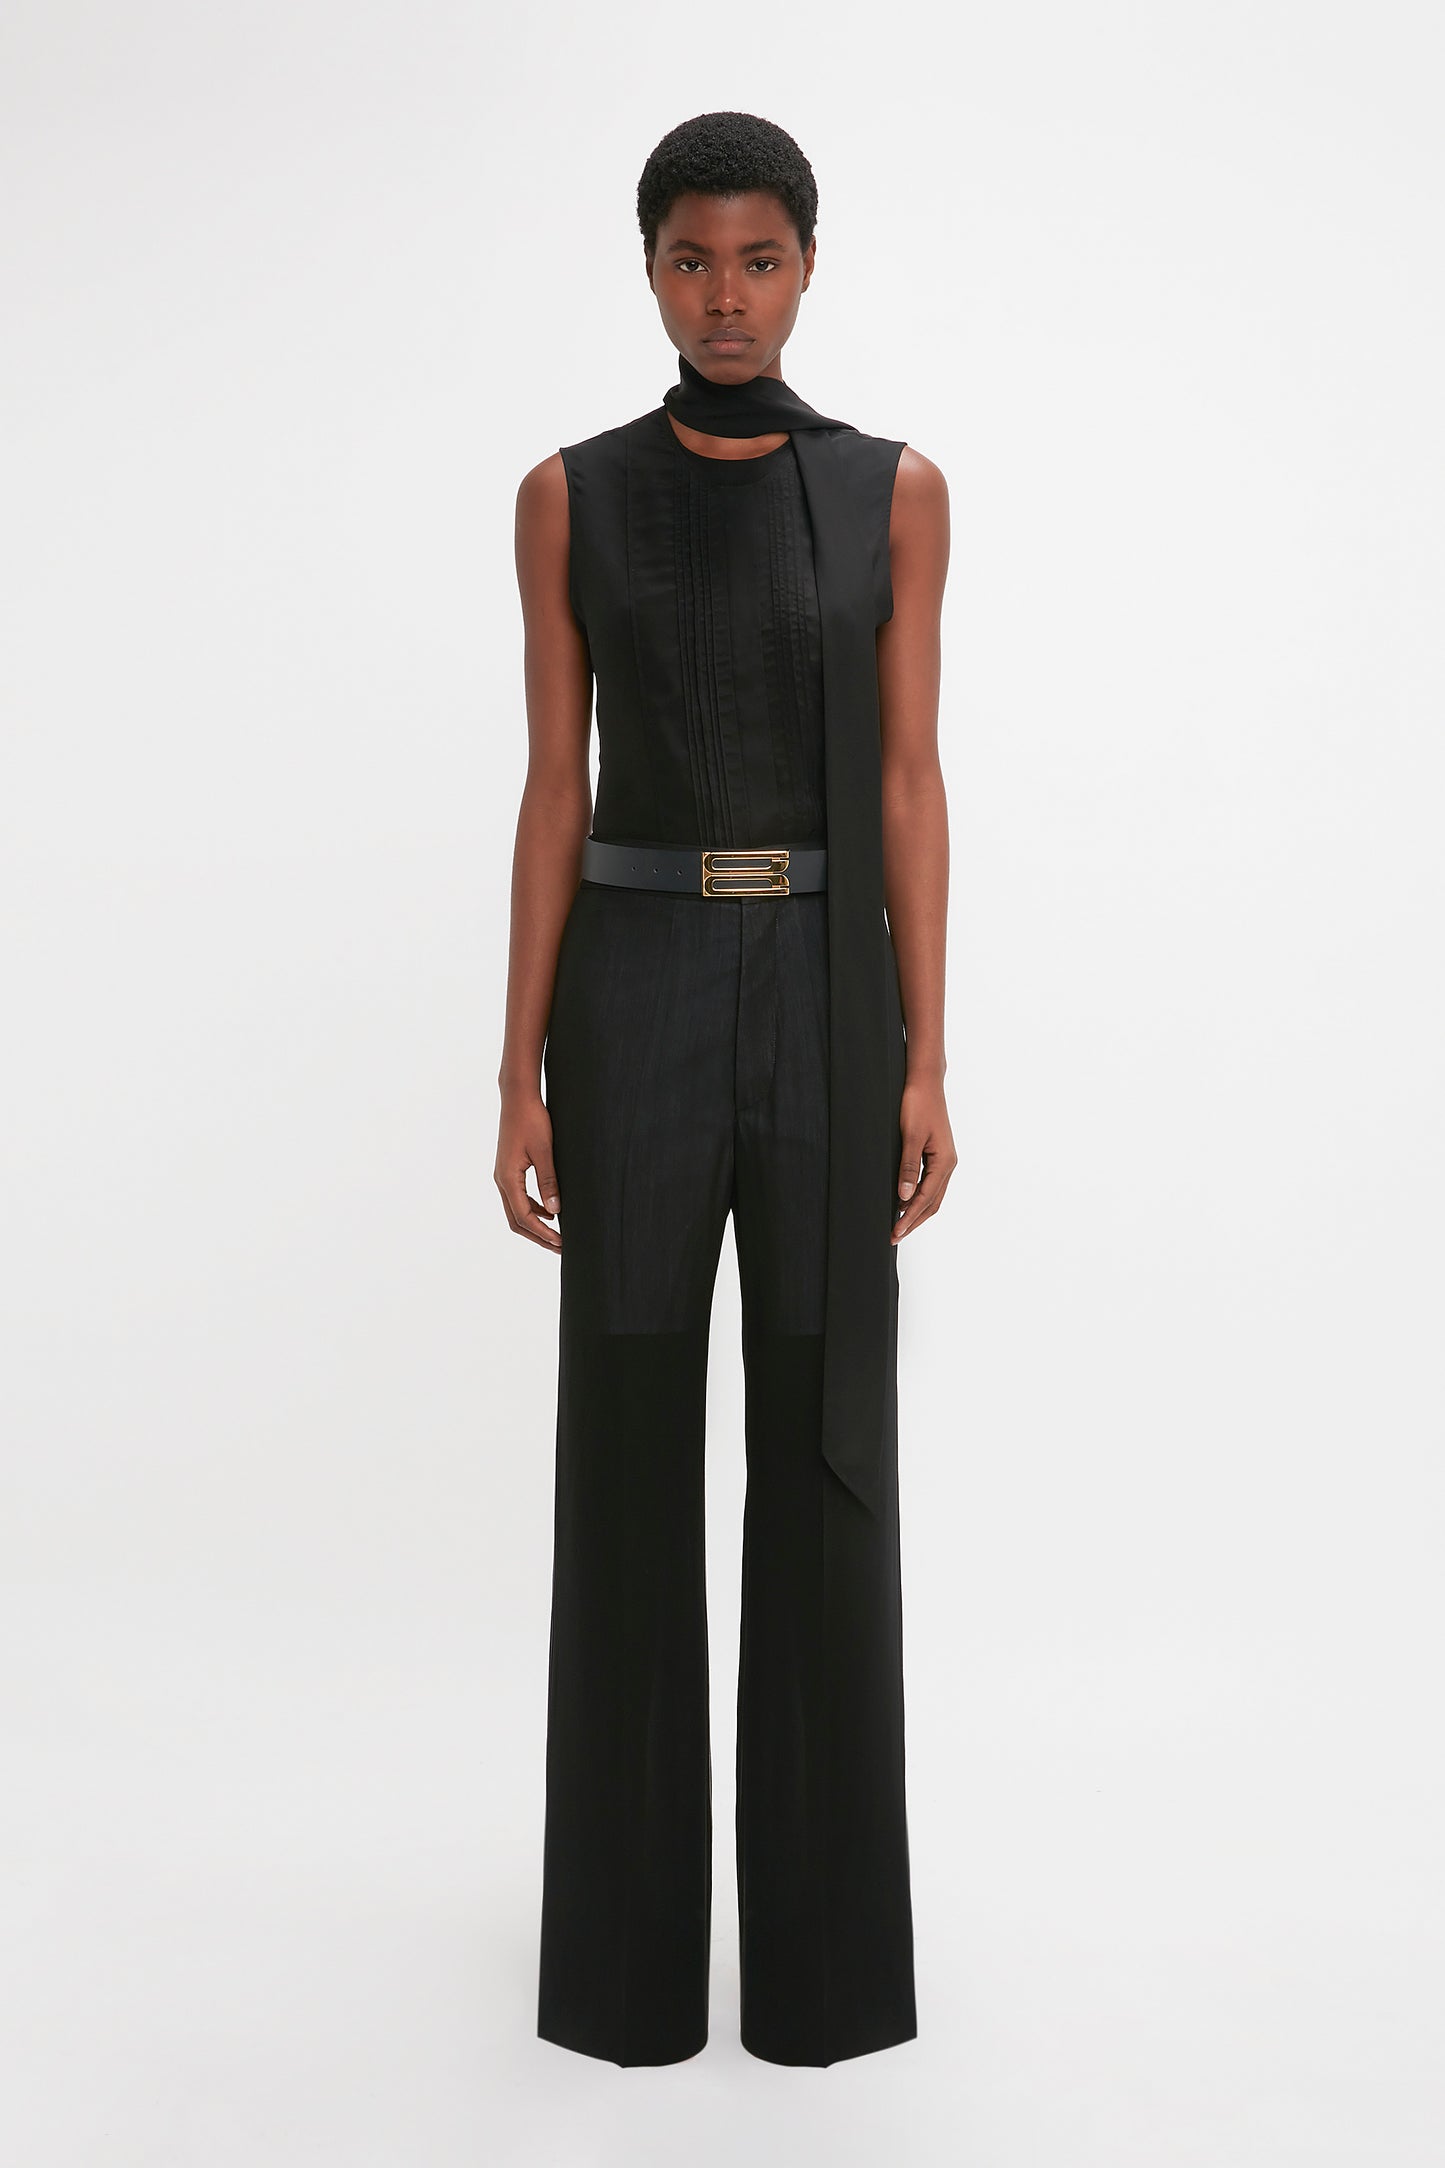 A black woman stands against a white background, modeling a sleek, sleeveless black jumpsuit with a high neckline and attached waistband detail straight leg trousers in black made from featherweight wool by Victoria Beckham.